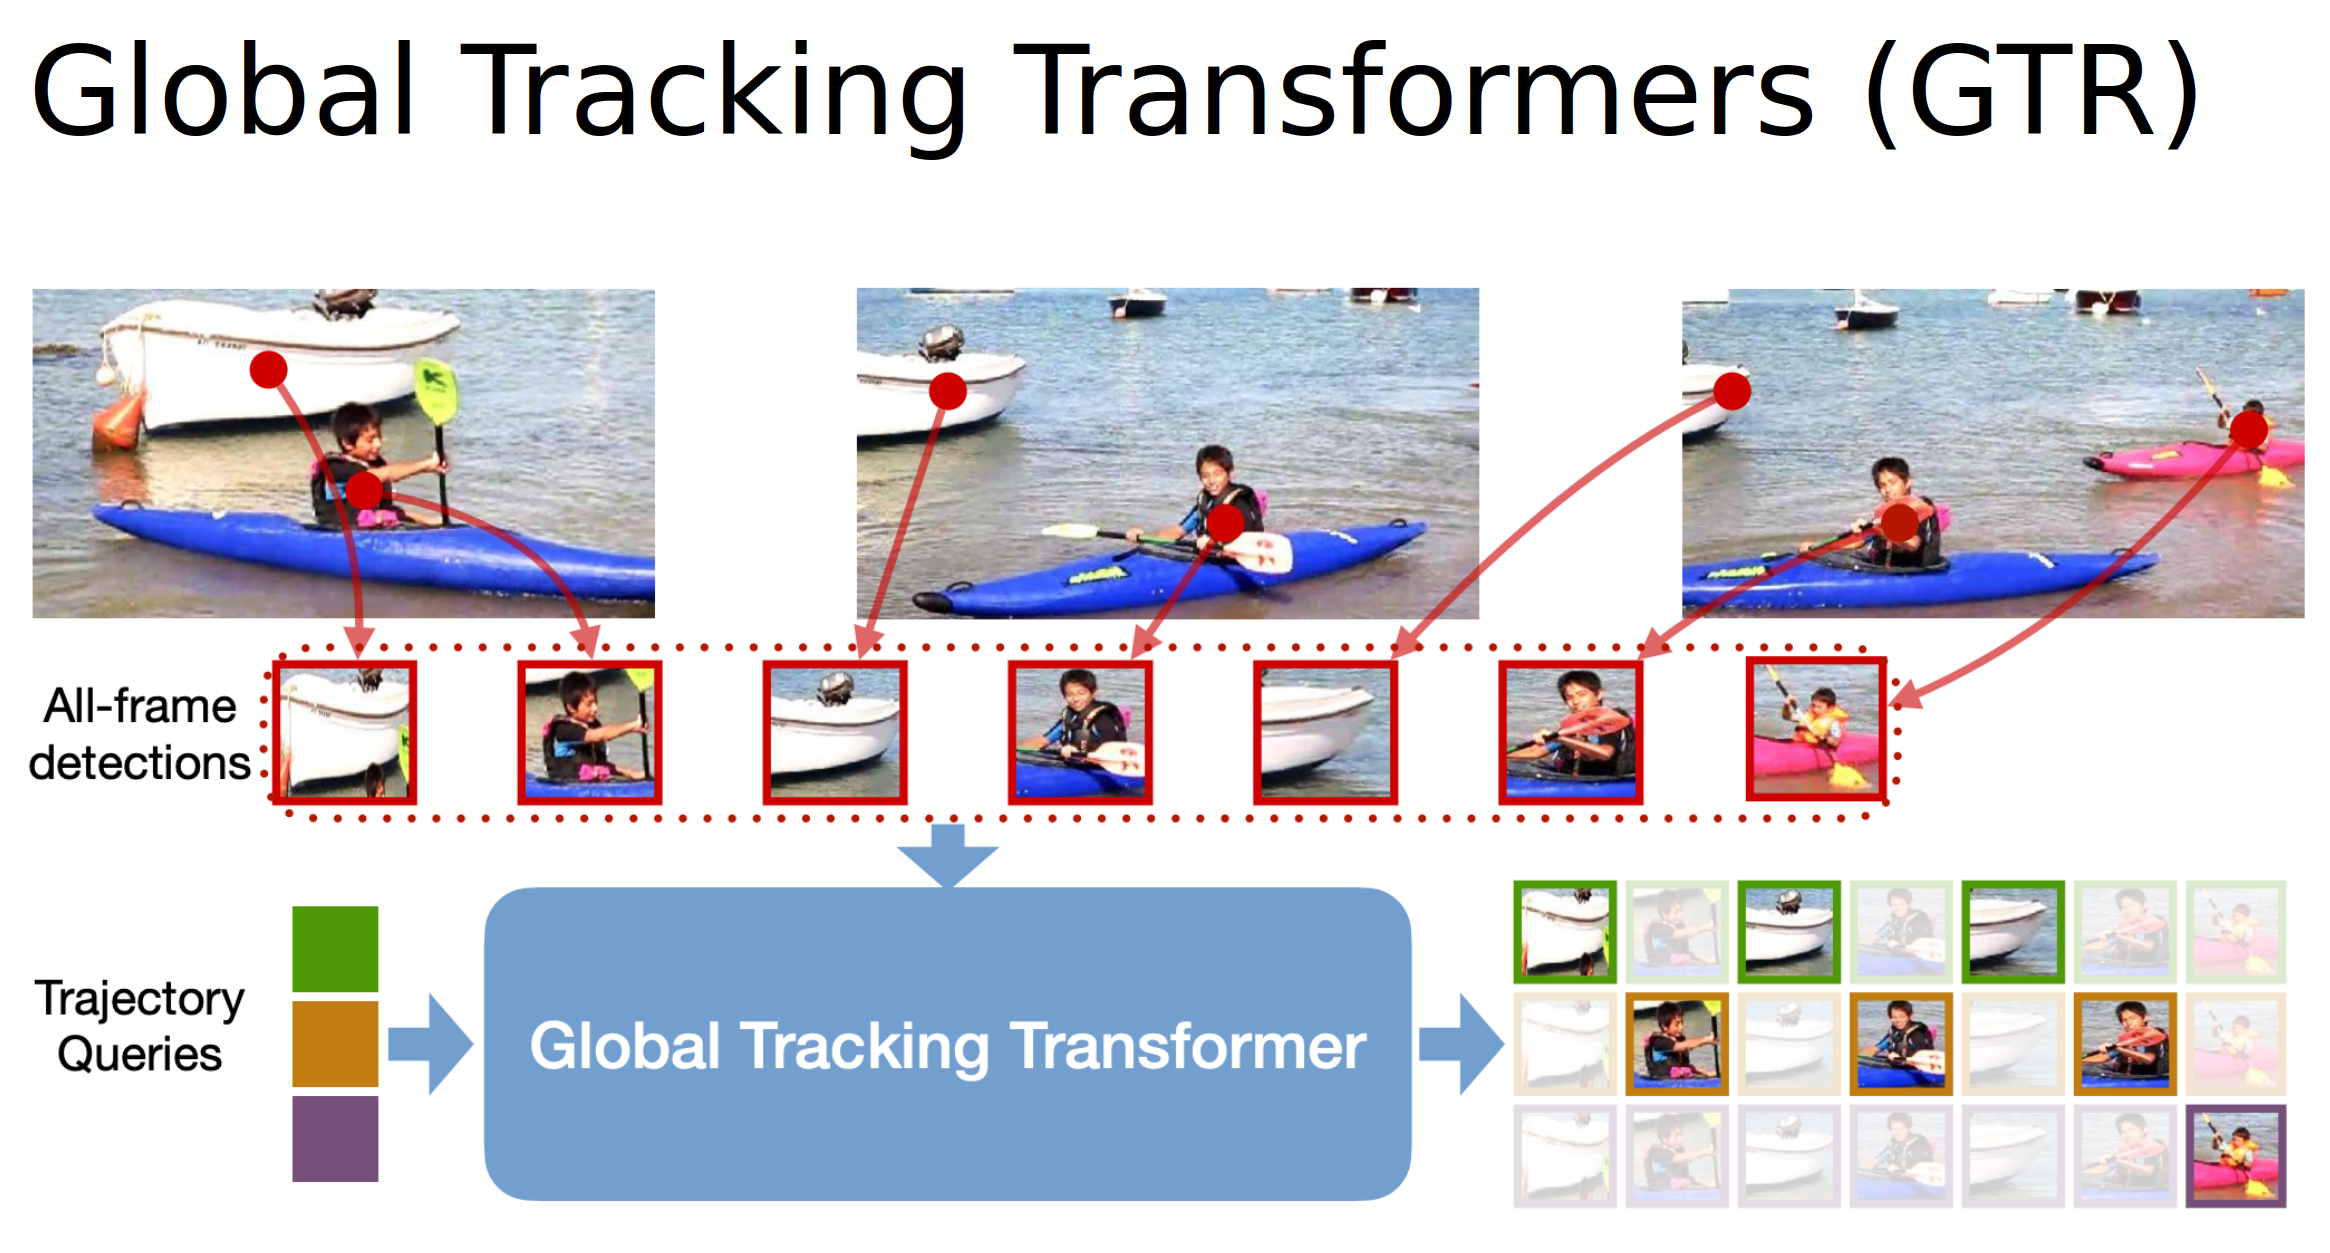 Global Tracking Transformer Architecture